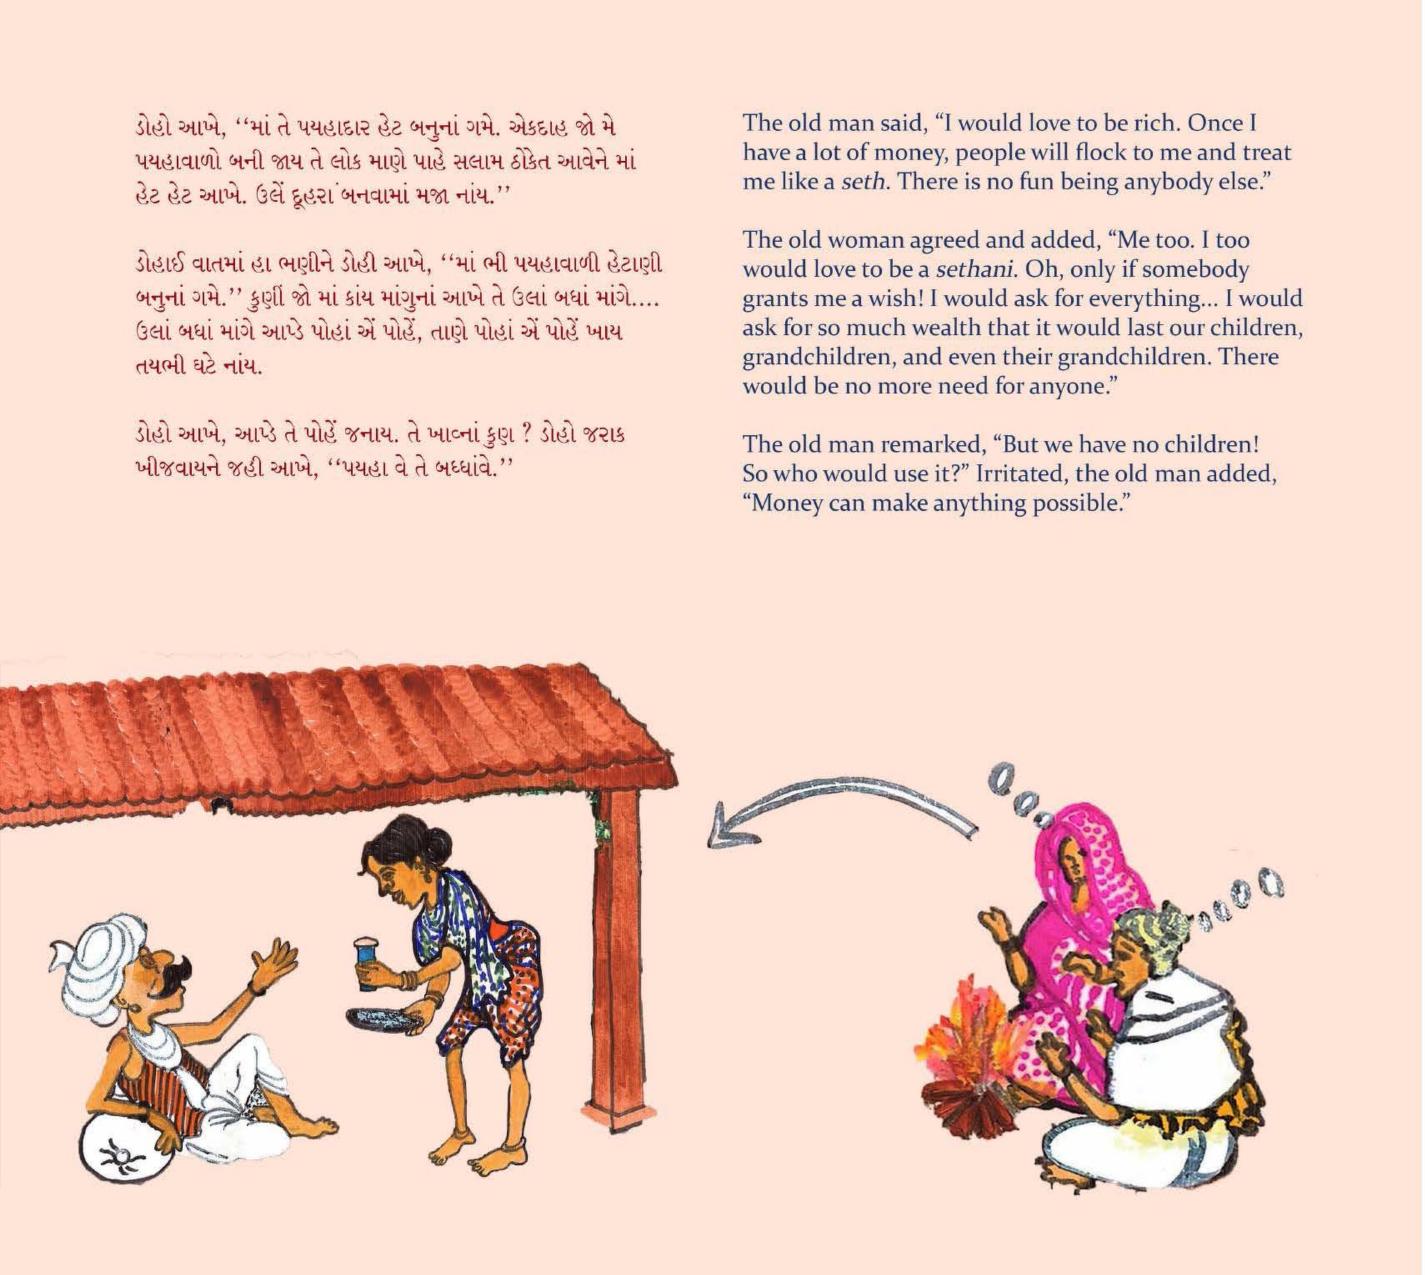 eBook | Vadu on the Old Woman's Nose (Dhodia) – A story from Gujarat |  Tribal Cultural Heritage in India